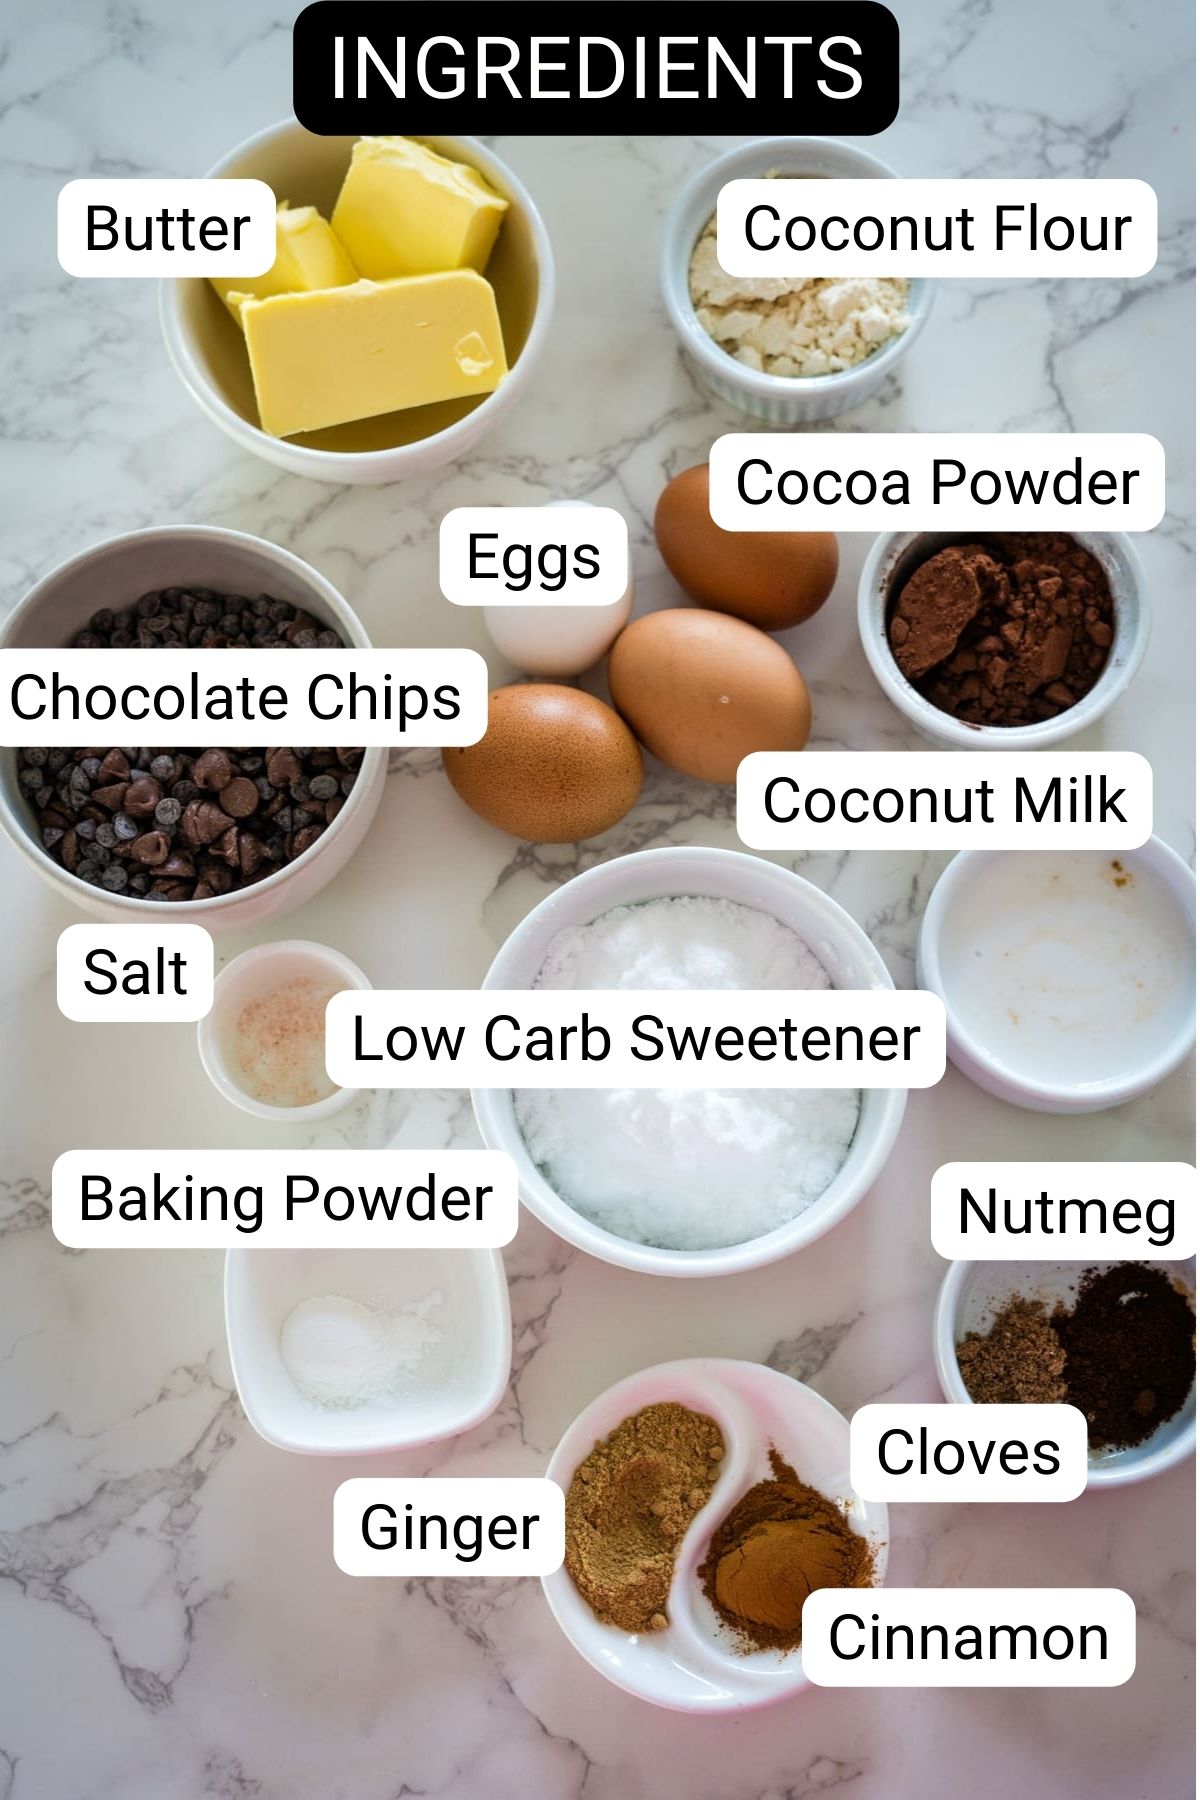 A list of ingredients for a spiced chocolate brownie recipe.